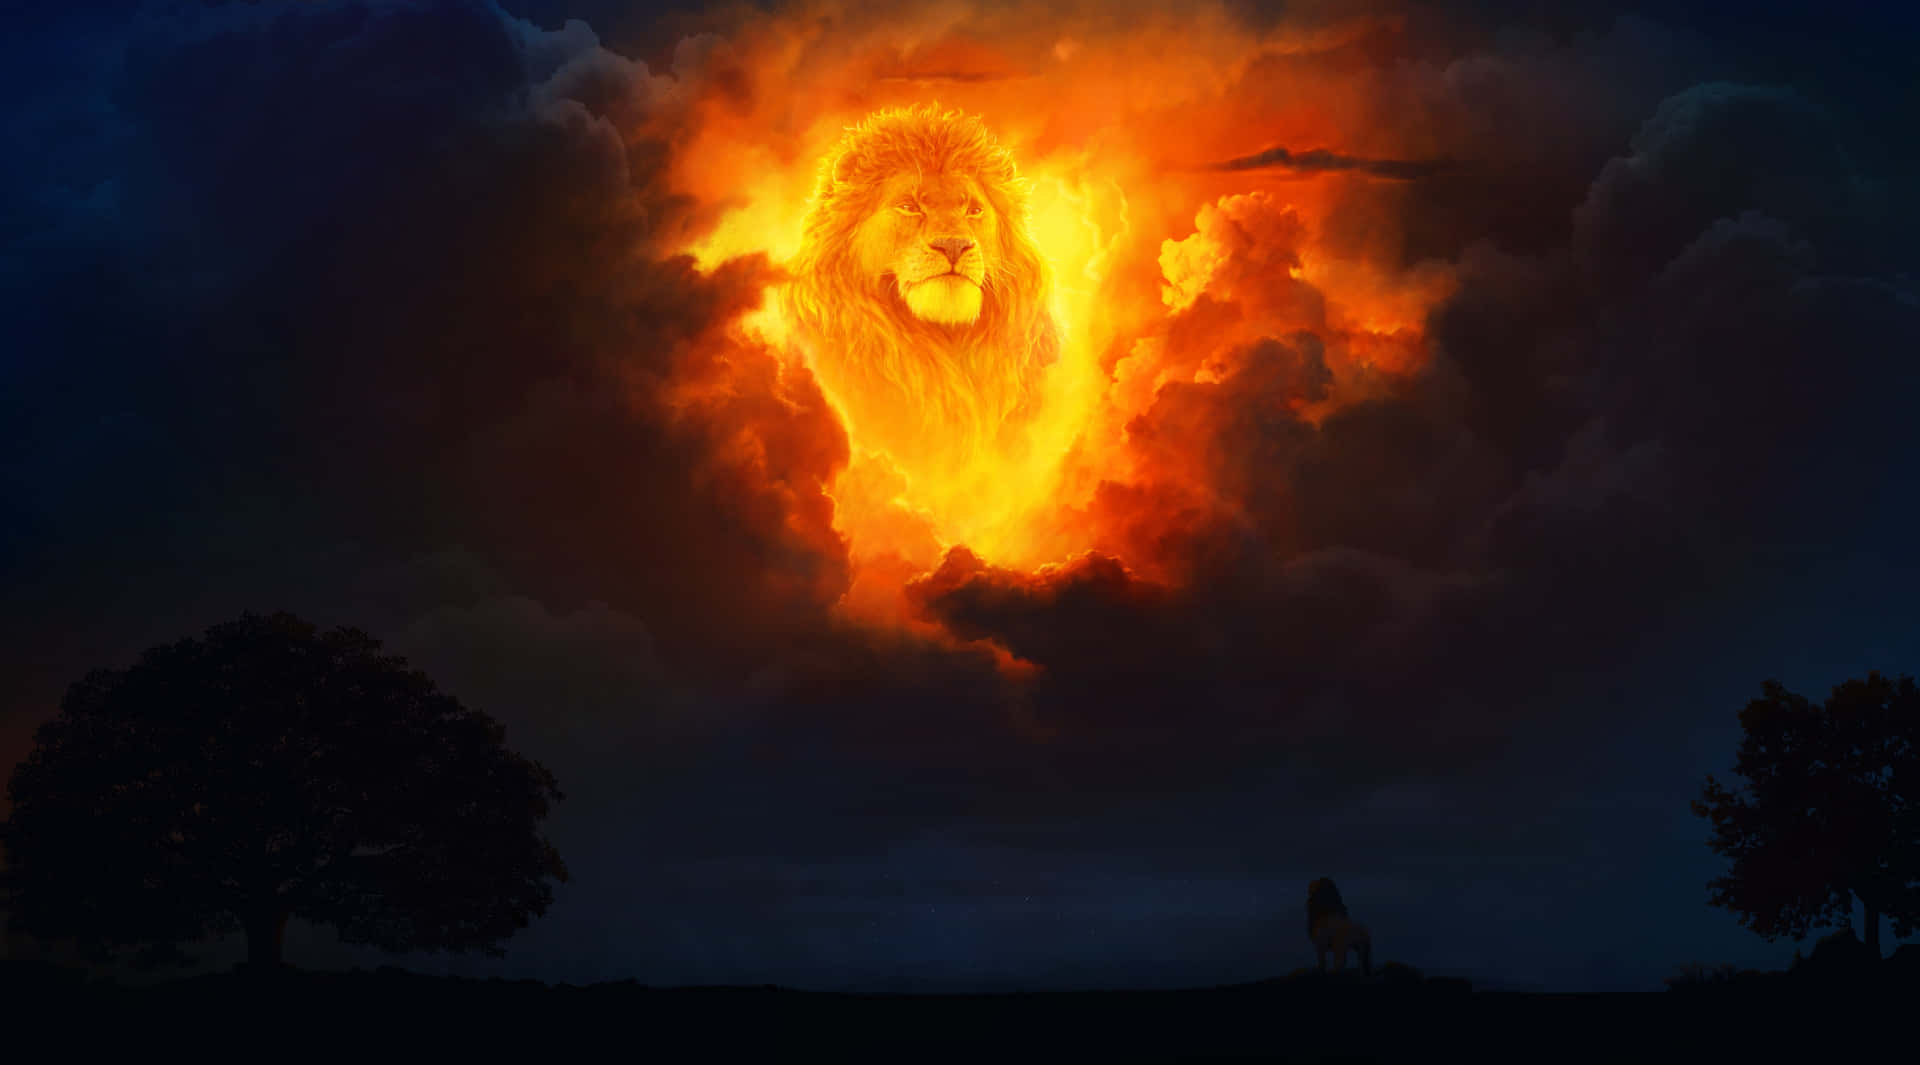 Fiery Lion King Picture